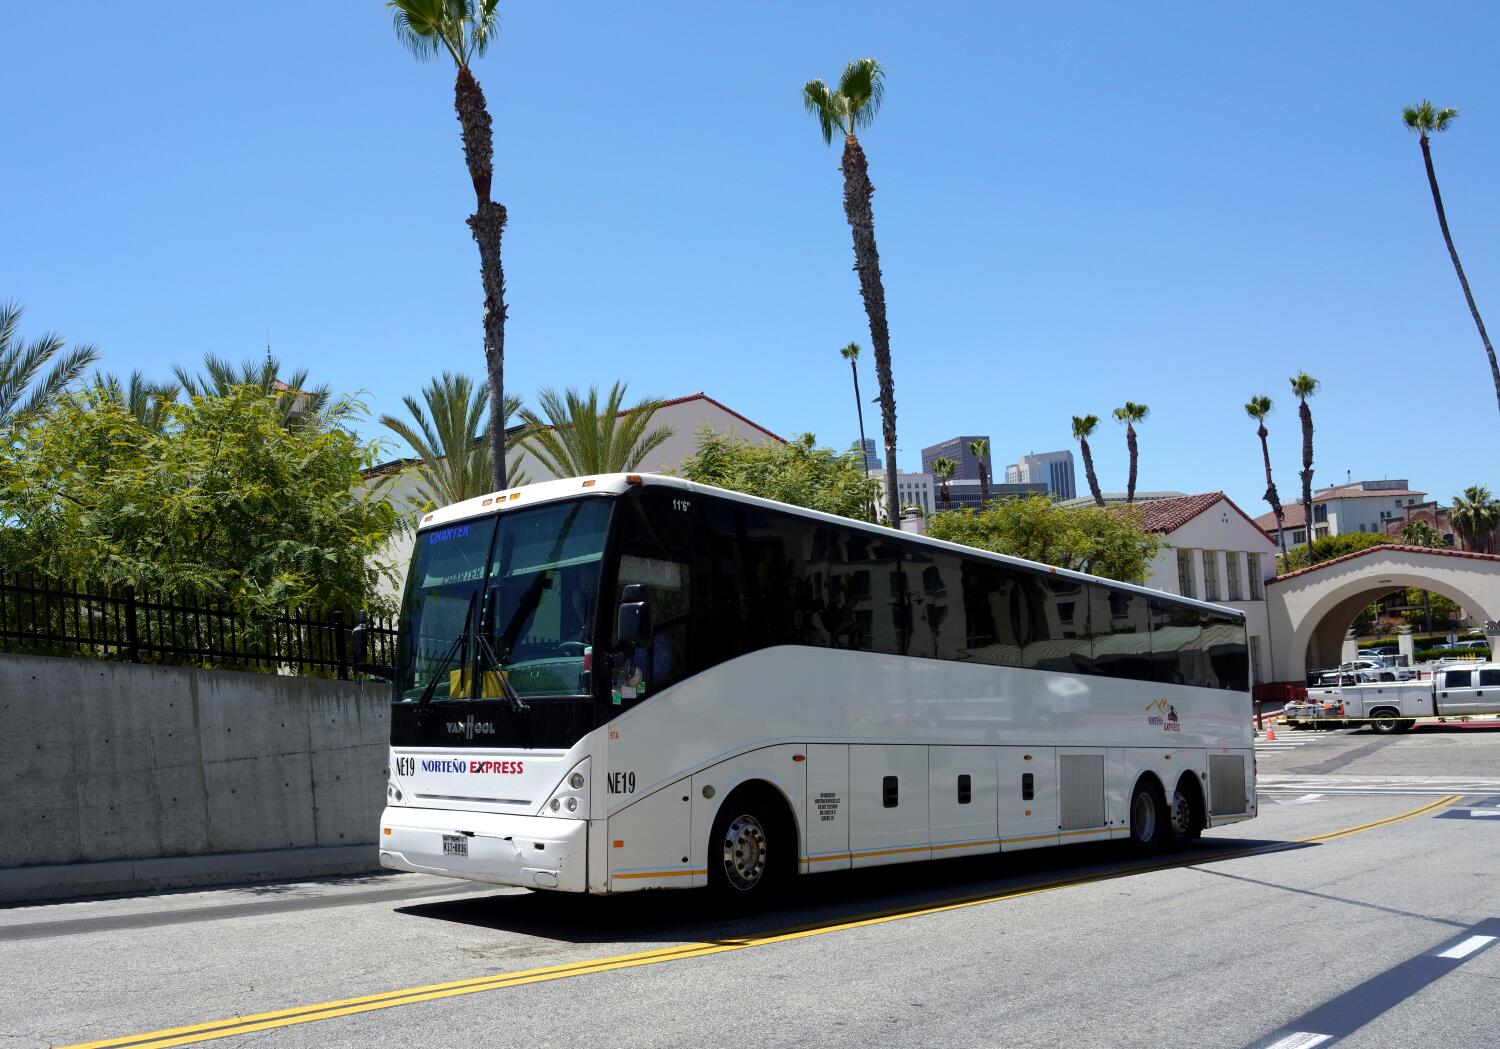 L.A. receives 20th bus of migrants courtesy of Texas Gov. Greg Abbott